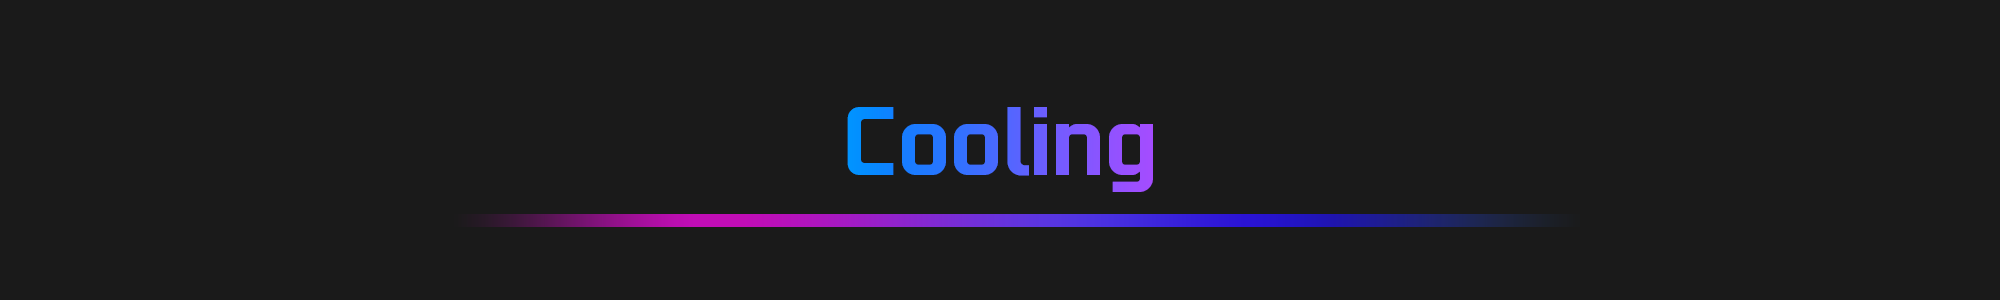 Cooling_title.png